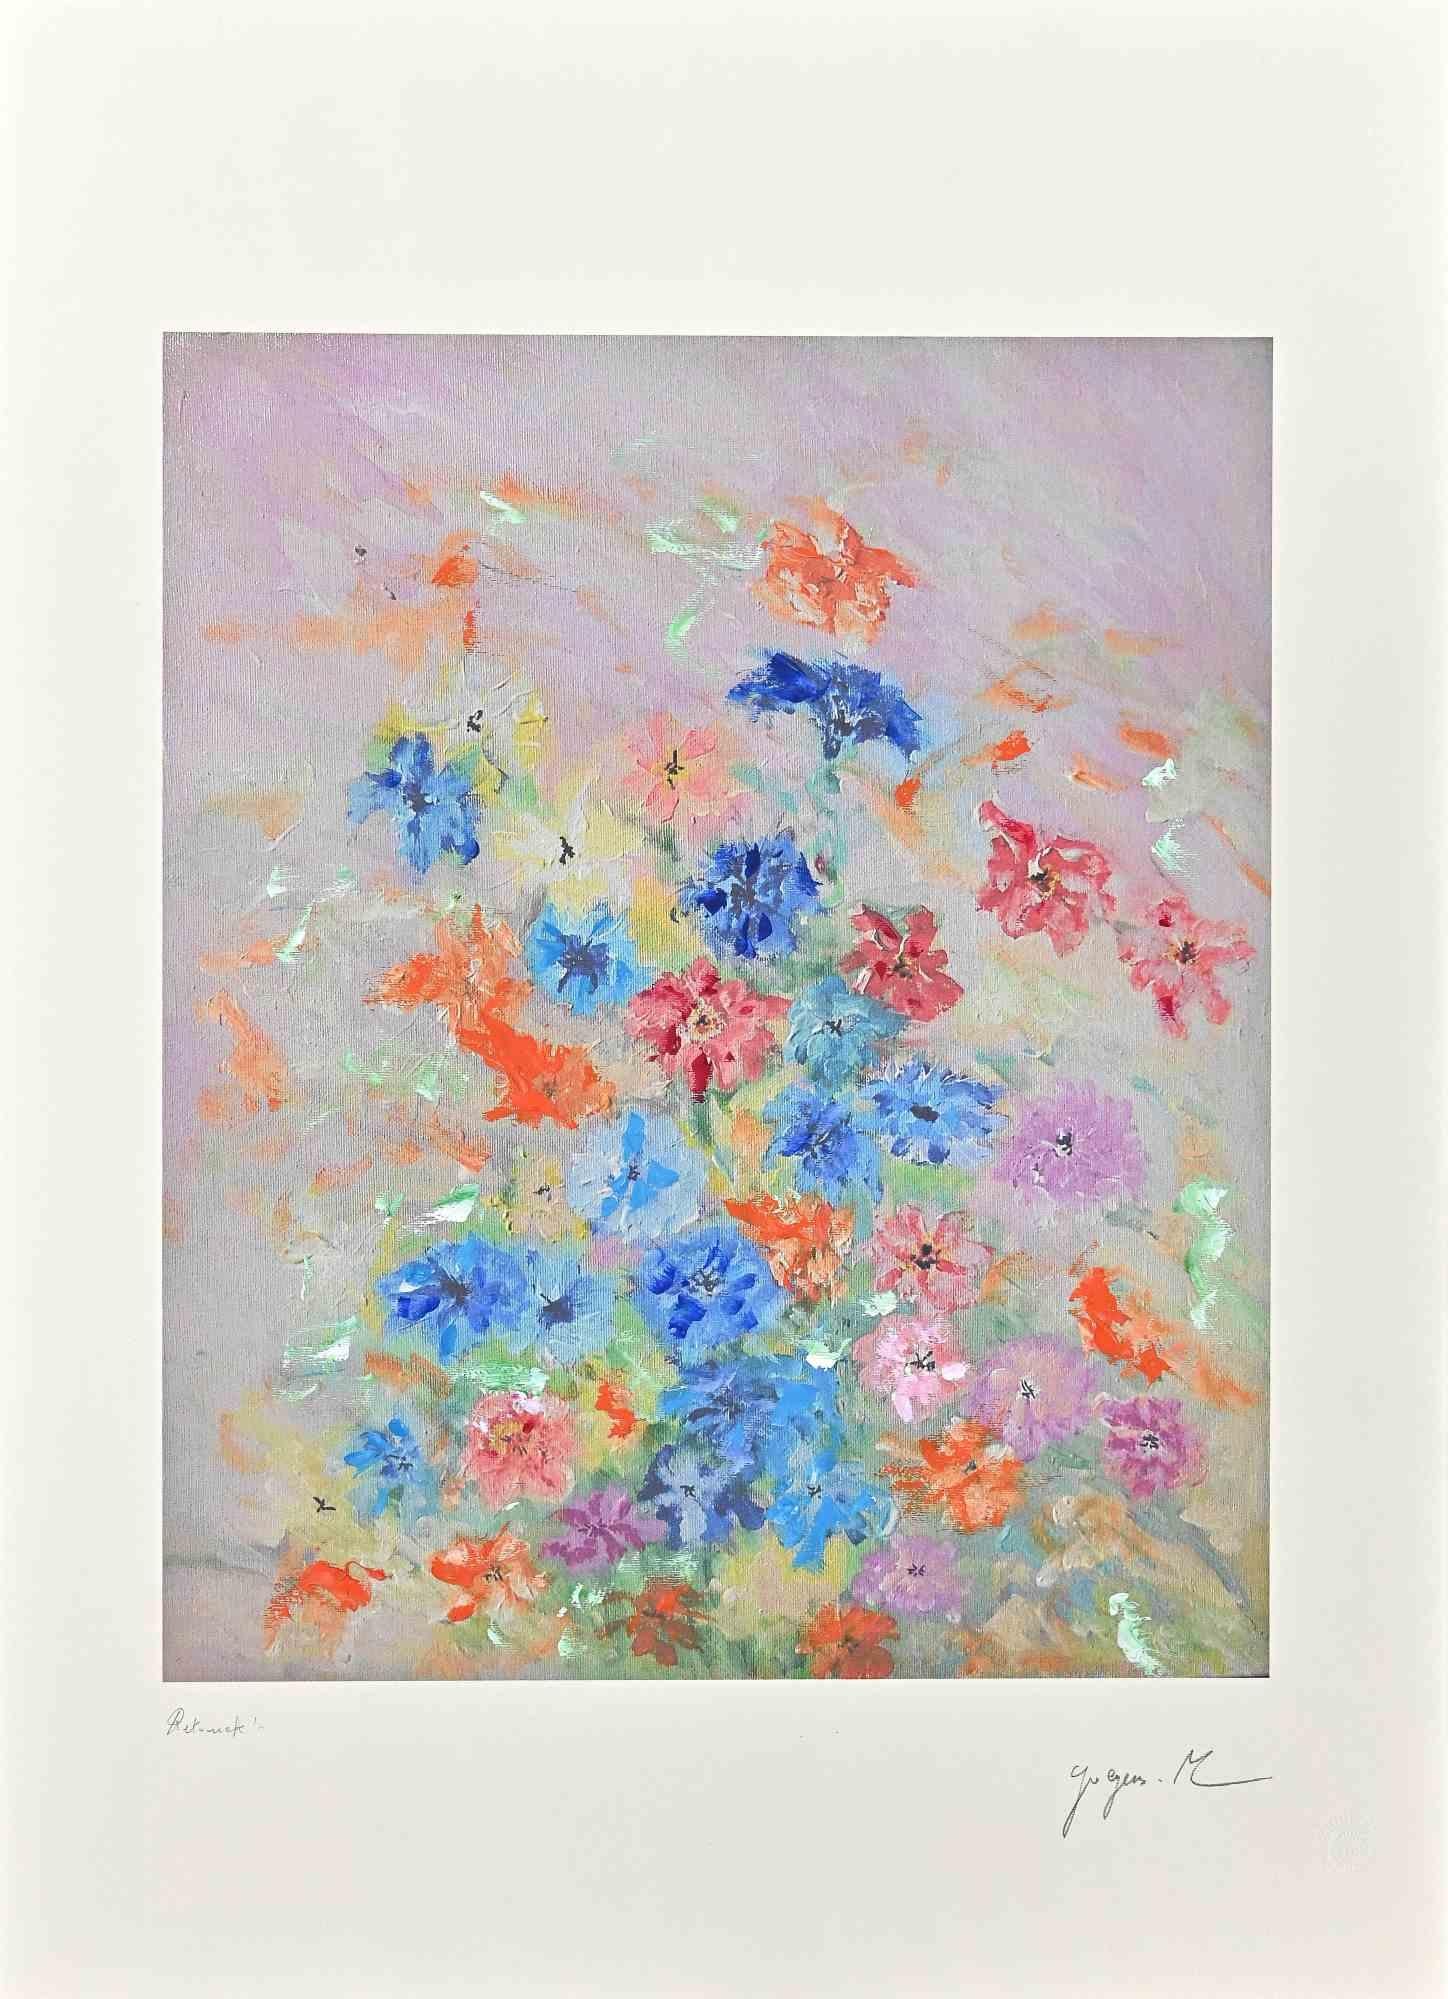 Flowers is a very colorful artwork realized by Martine Goyens in the late 20th Century.

Digigraph print.

Hand-signed.

Good conditions.

The artwork id depicted through confident strokes in a well-balanced composition.